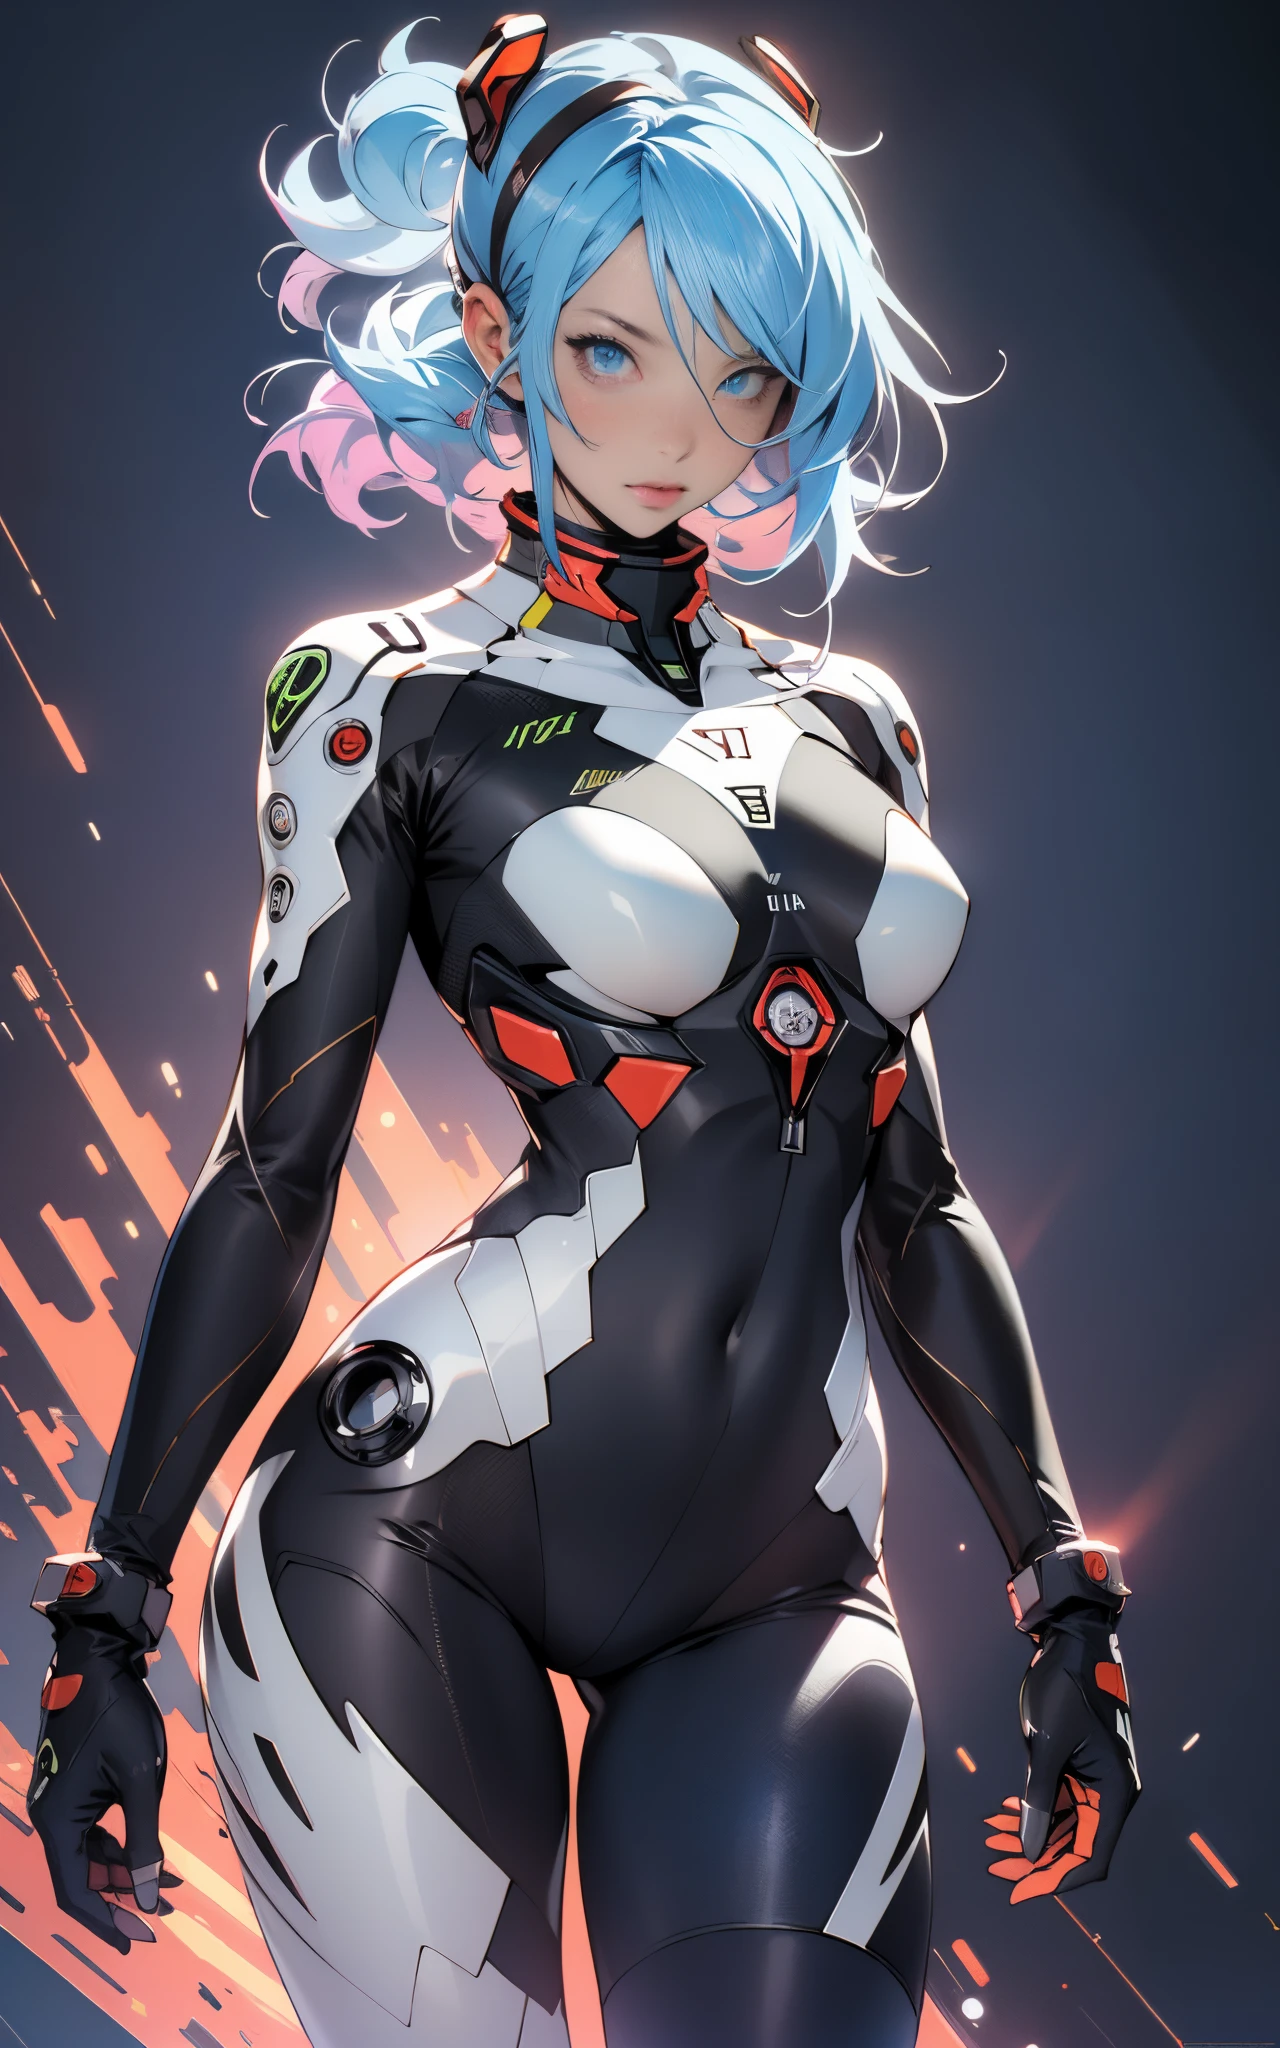 ((( Woman))), ((Best Quality)), ((masutepiece)), (Detailed: 1.4), (Absurd), A 35-year-old woman wears a Simon Bisley-style micro thong., Genesis evangelion neon style clothing, 2-piece clothing, bobhair, arm tatoo, cybernetic hands, pastel, Centered, scale to fit the dimensions, nffsw (High dynamic range),Ray tracing,NVIDIA RTX,Hyper-Resolution,Unreal 5,Subsurface Dispersion,  PBR Texture, Post-processing, Anisotropy Filtering, depth of fields, Maximum clarity and sharpness, Multilayer textures, Albedo and specular maps, Surface Shading, accurate simulation of light and material interactions, Perfect proportions, Octane Render, Two-tone lighting, Wide aperture, Low ISO, White Balance, thirds rule, 8K Raw, Crysisnanosuit,loraeyes,nijistyle,cateyes,Blue hair, Blue eyes